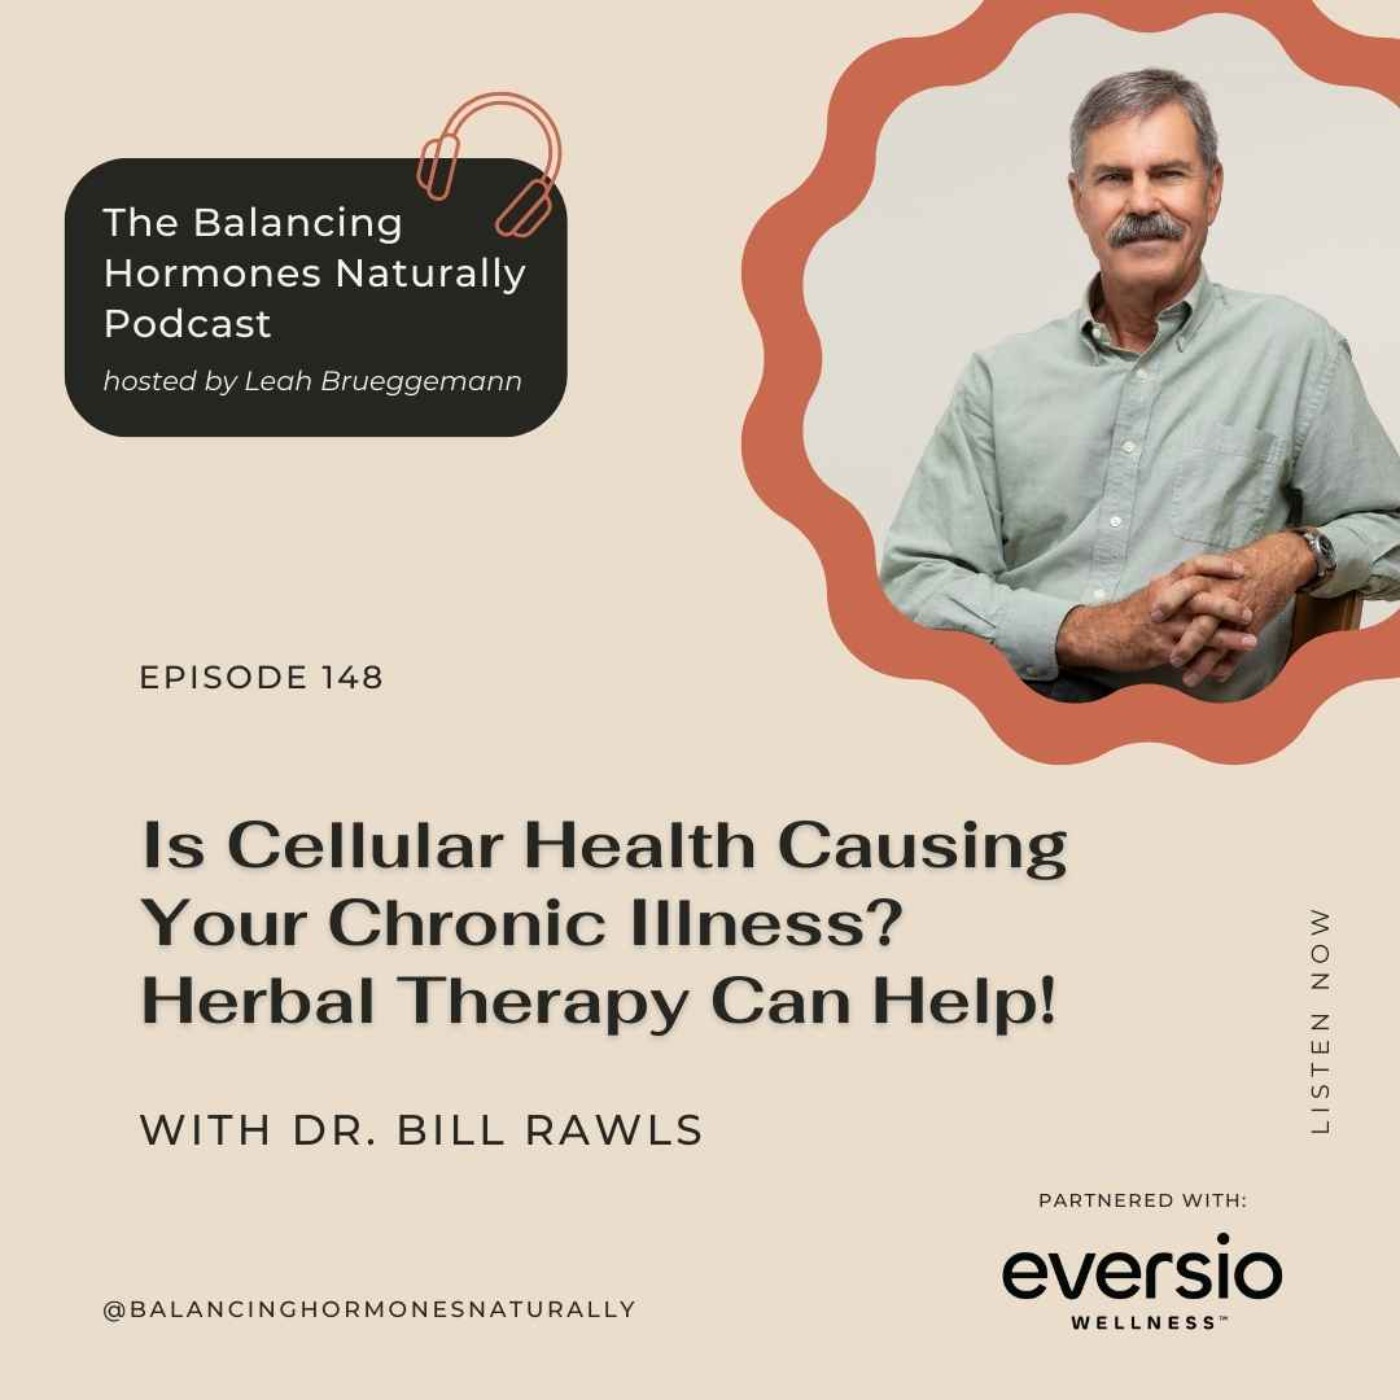 Episode 148: Is Cellular Health Causing Your Chronic Illness? Herbal Therapy Can Help!